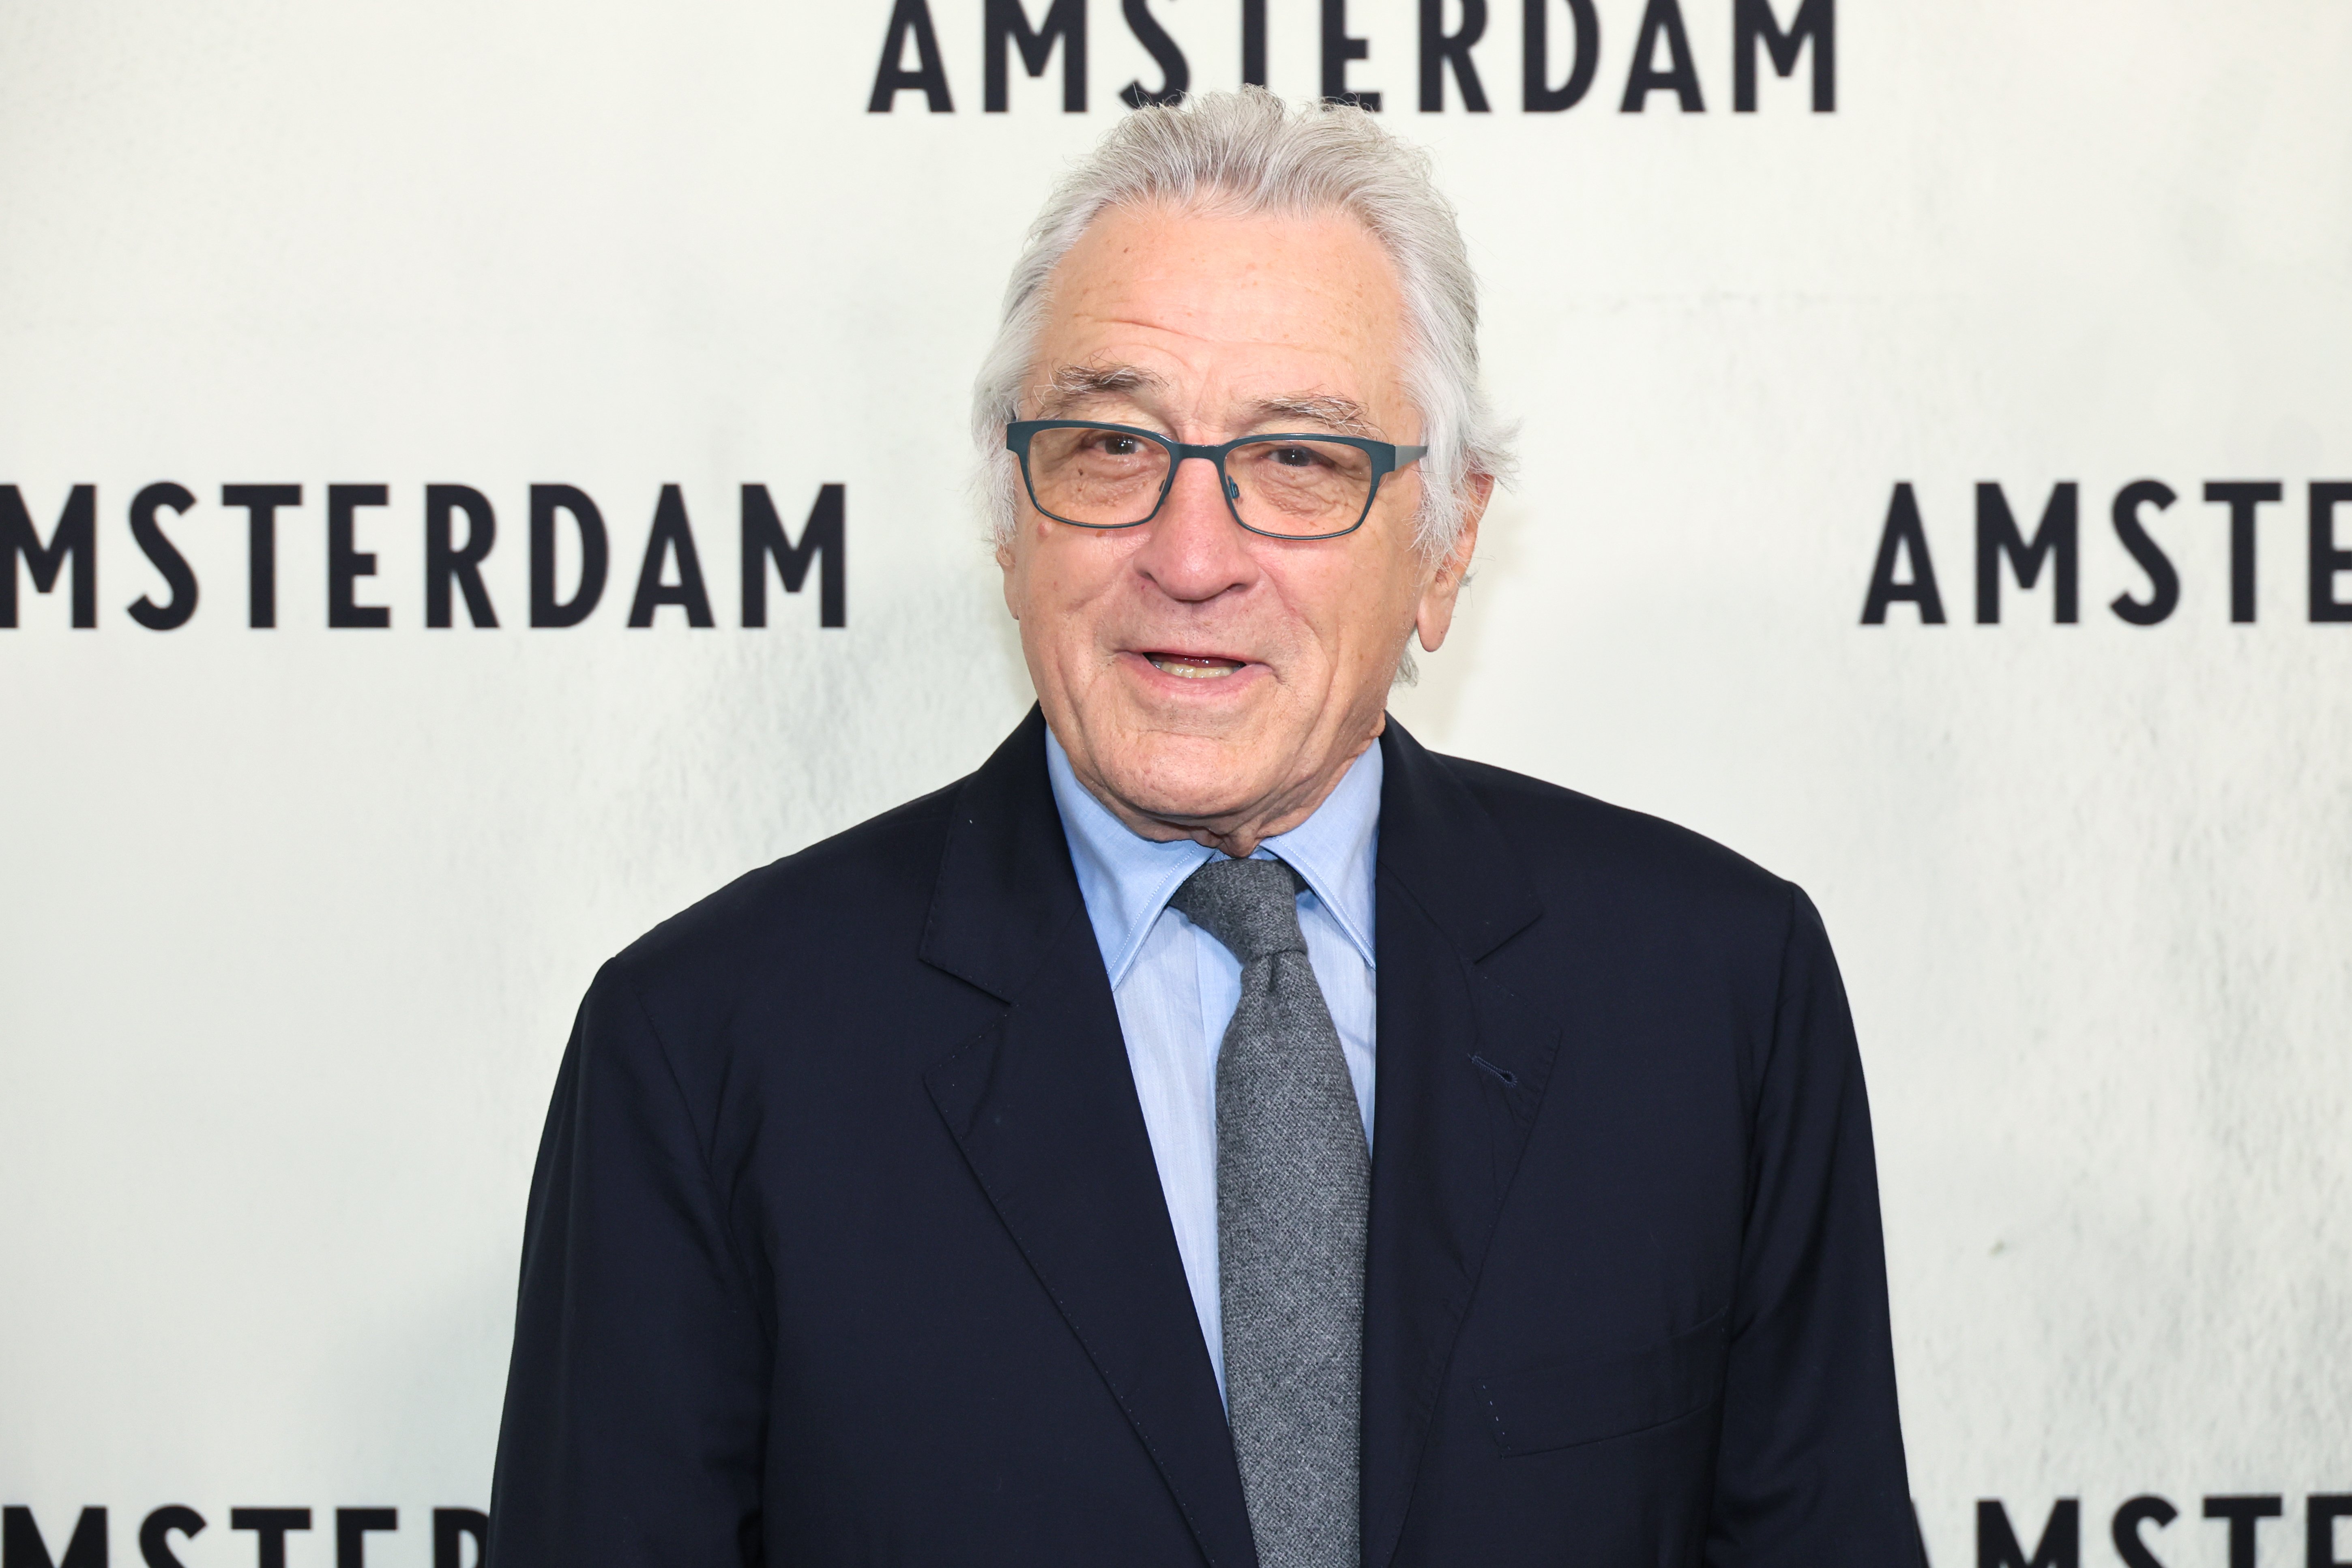  Robert De Niro attends the 'Amsterdam' World Premiere at Alice Tully Hall on September 18, 2022 in New York City | Source: Getty Images 